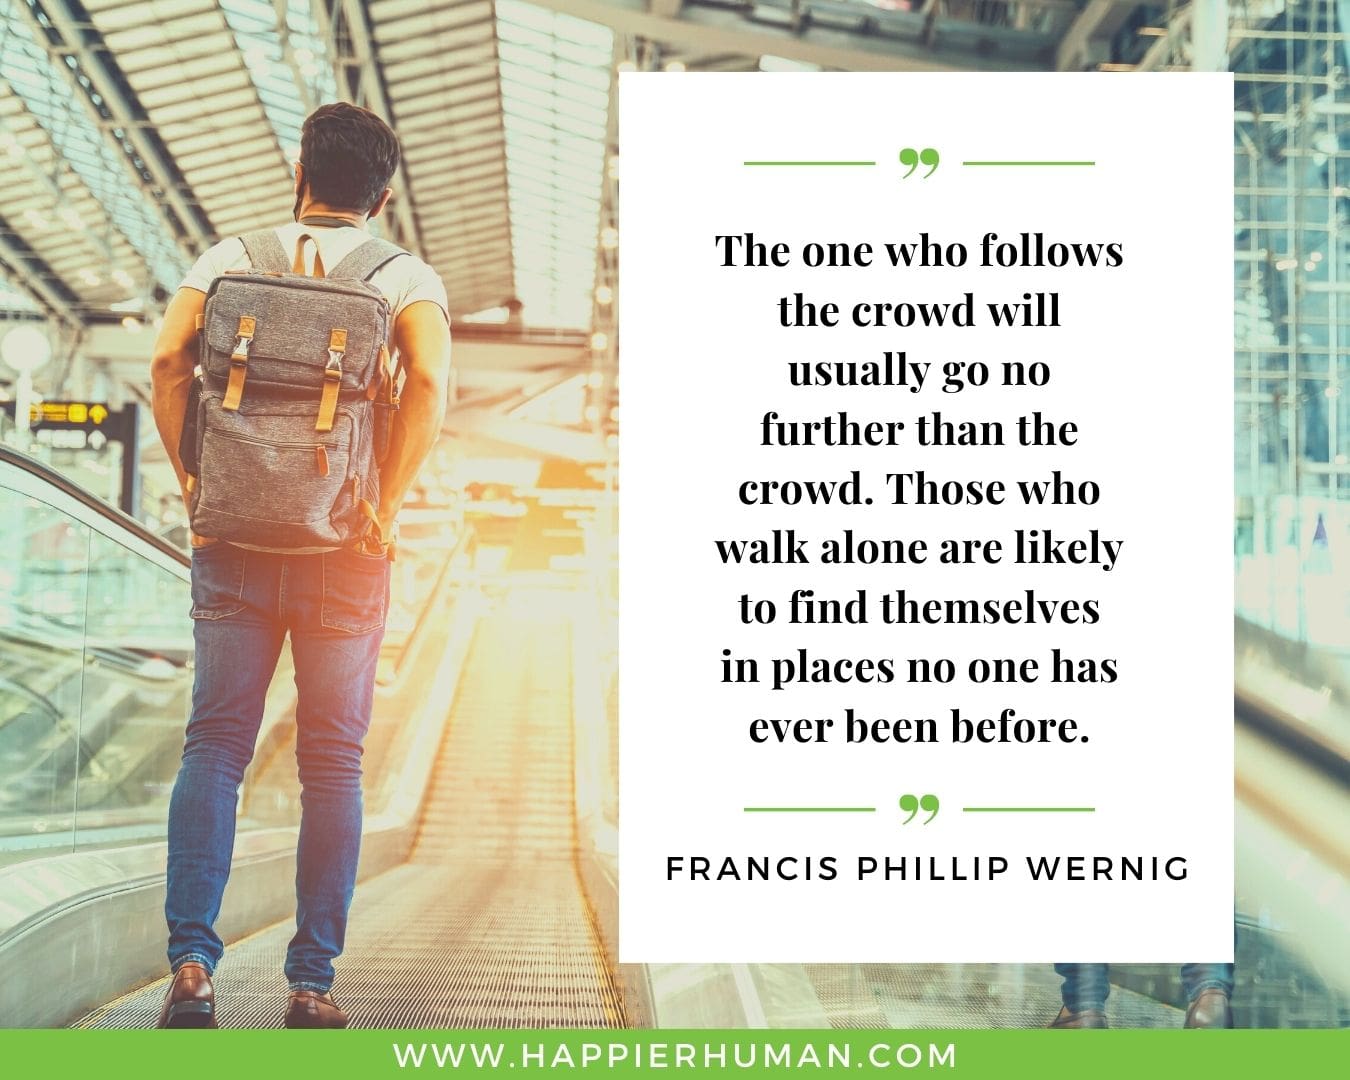 Introvert Quotes - “The one who follows the crowd will usually go no further than the crowd. Those who walk alone are likely to find themselves in places no one has ever been before.” – Francis Phillip Wernig